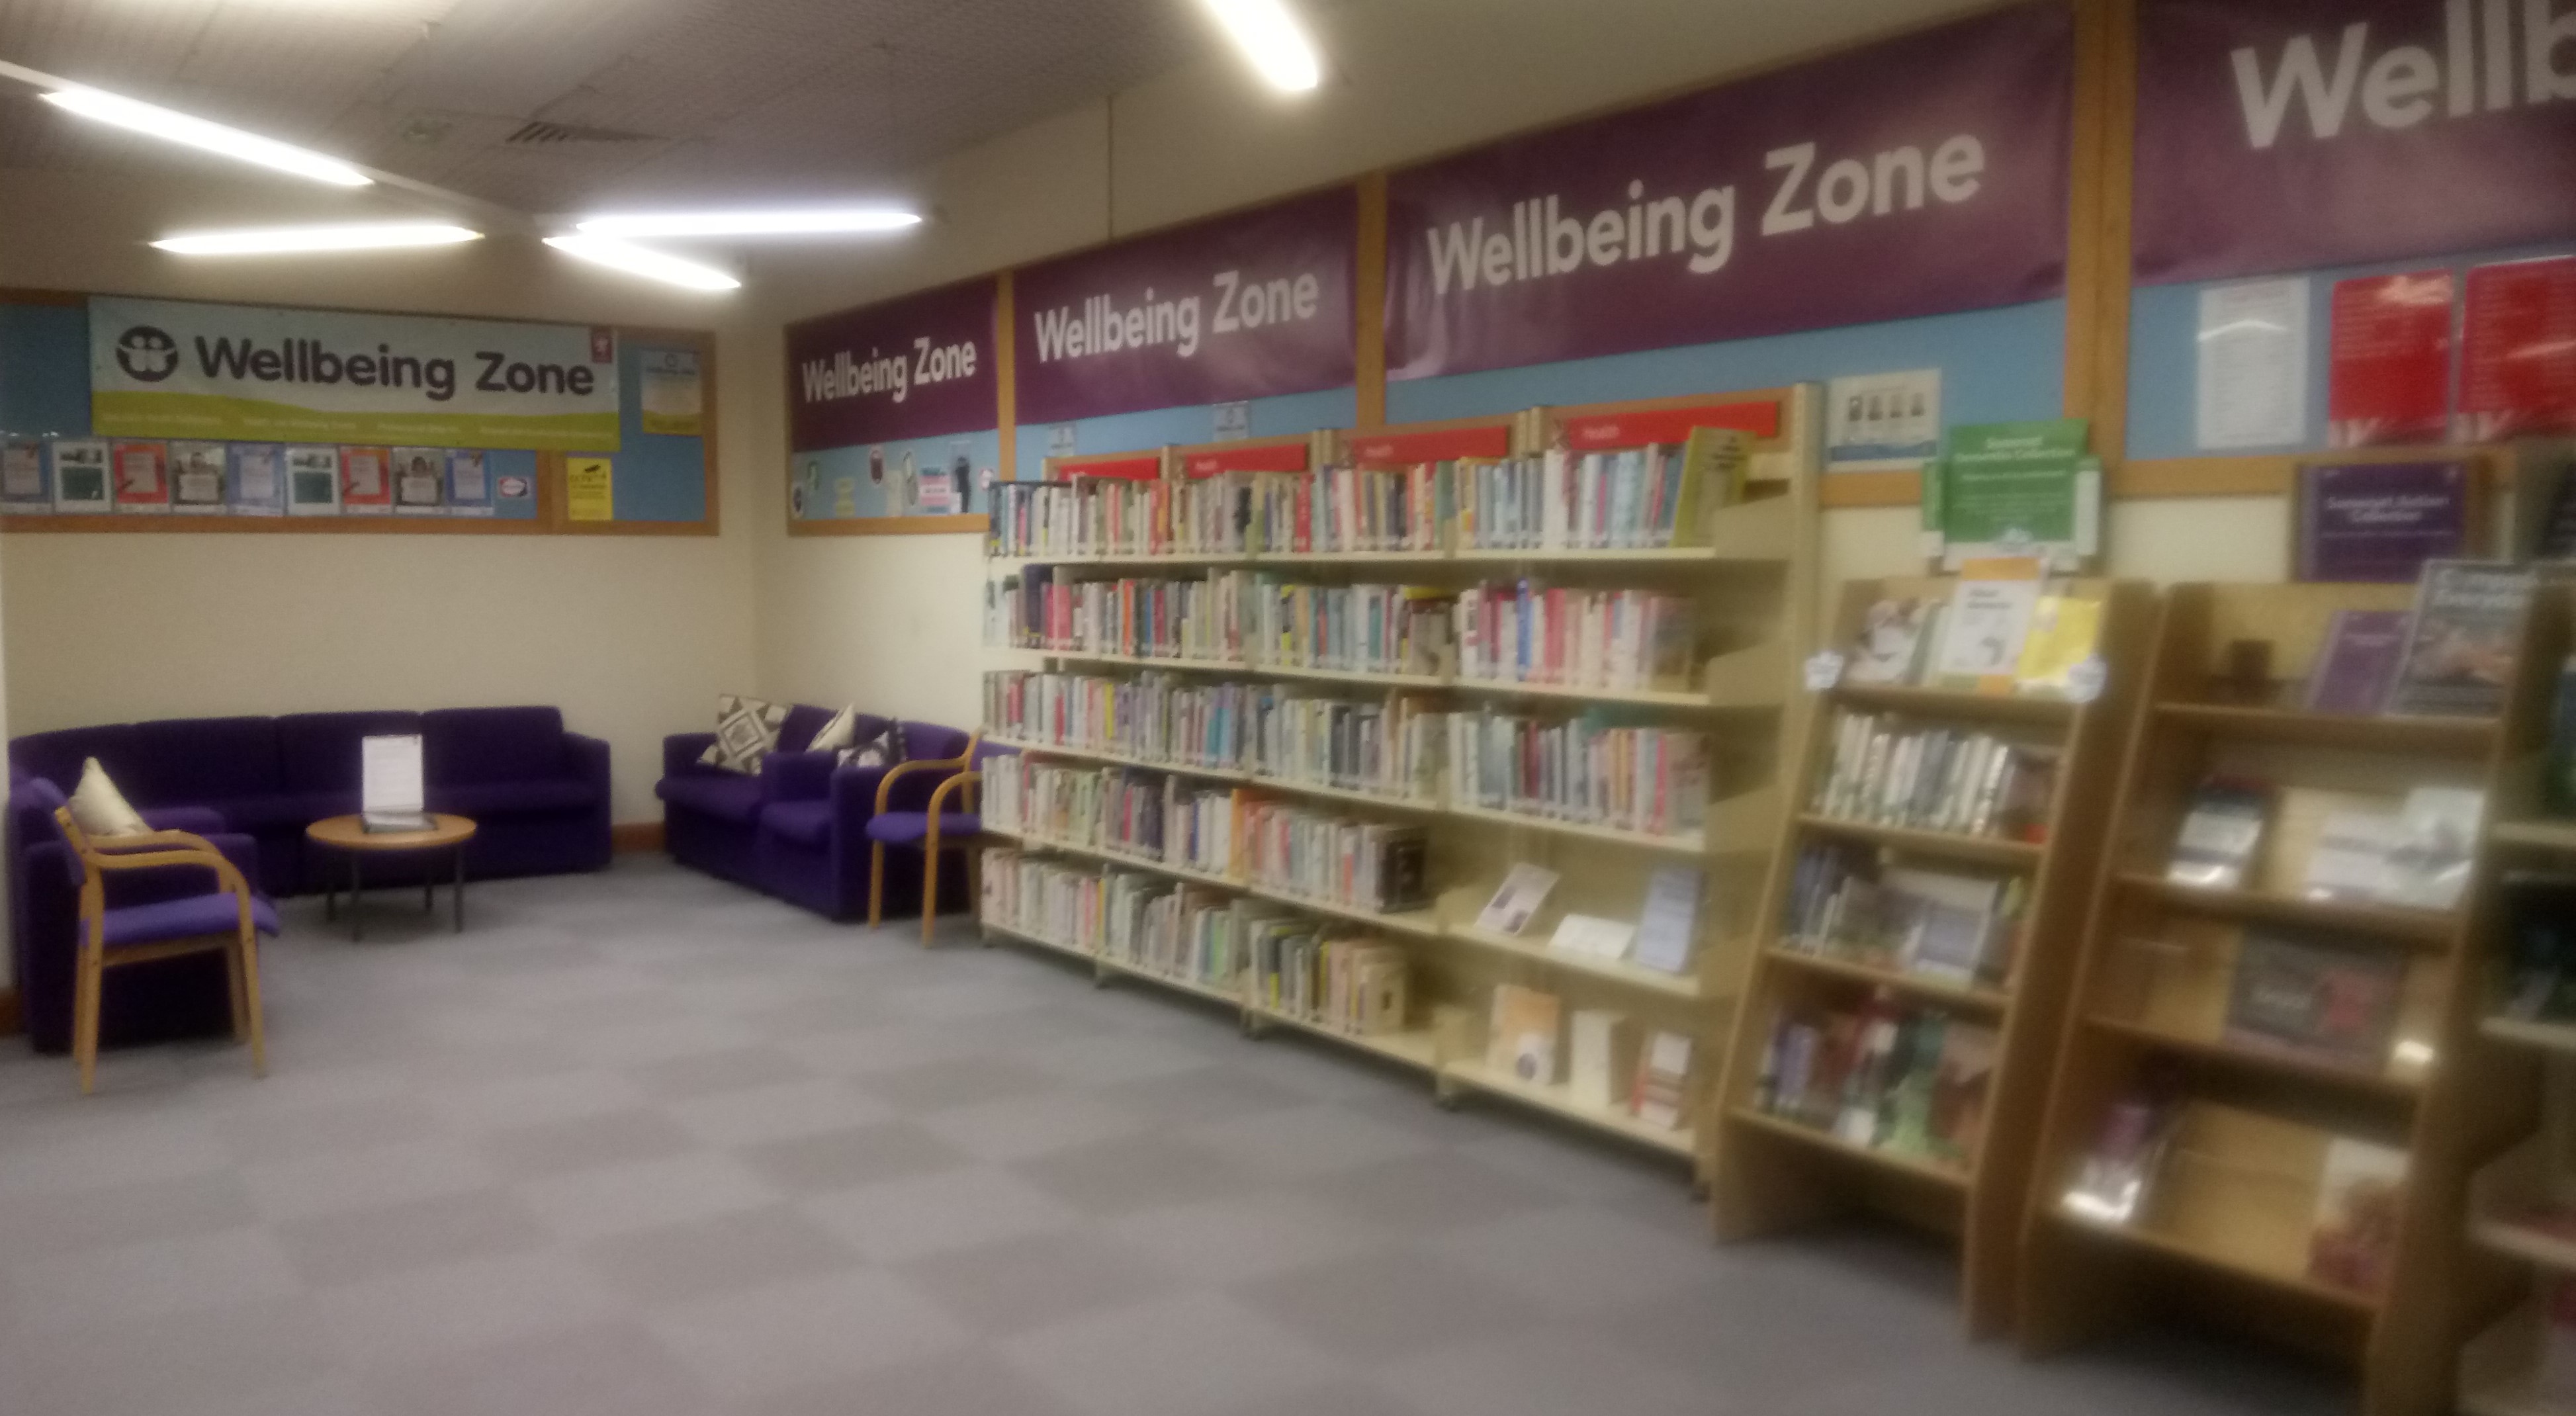 Taunton Library Wellbeing Zone